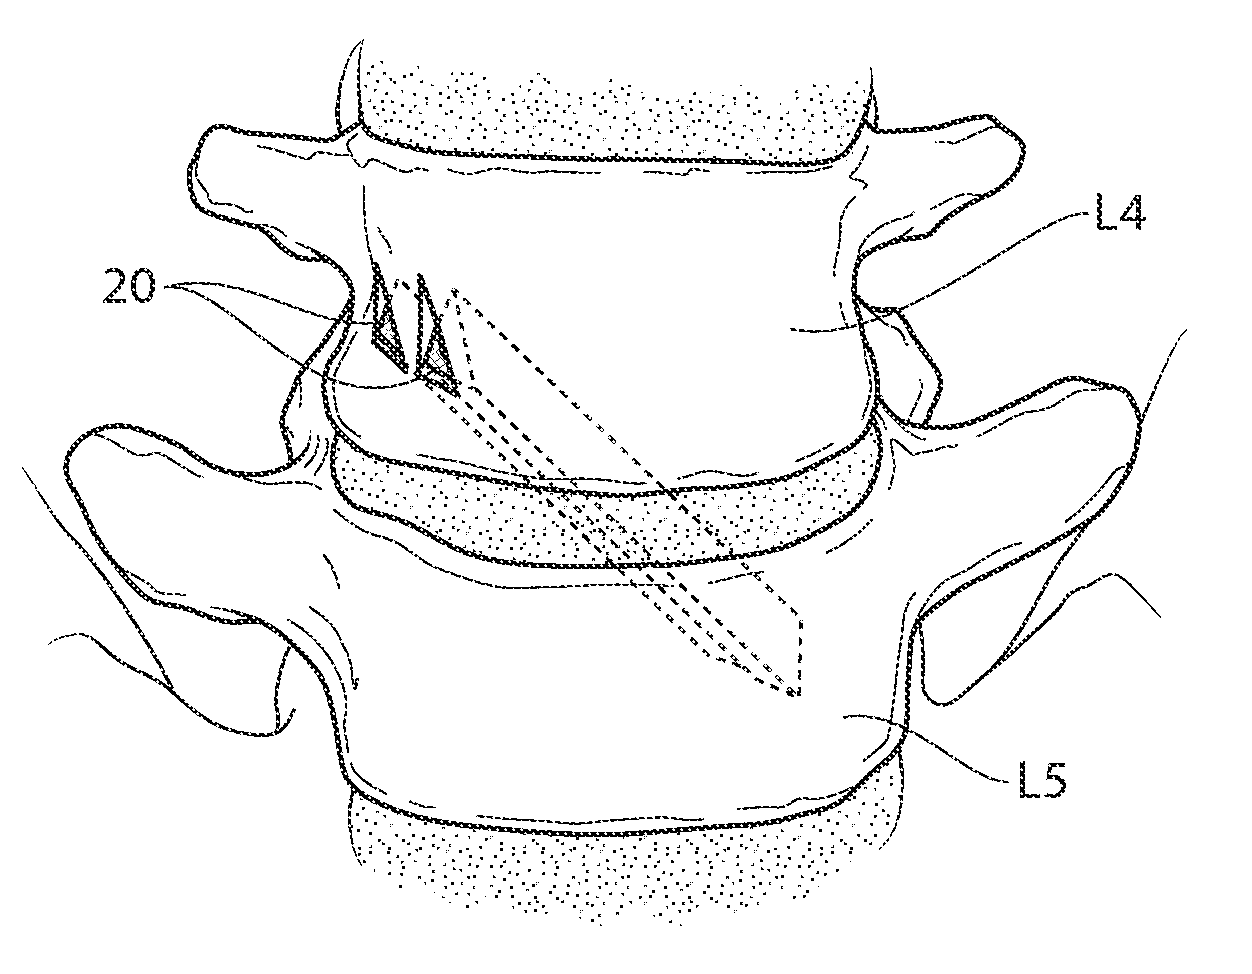 Apparatus, systems, and methods for achieving trans-iliac lumbar fusion